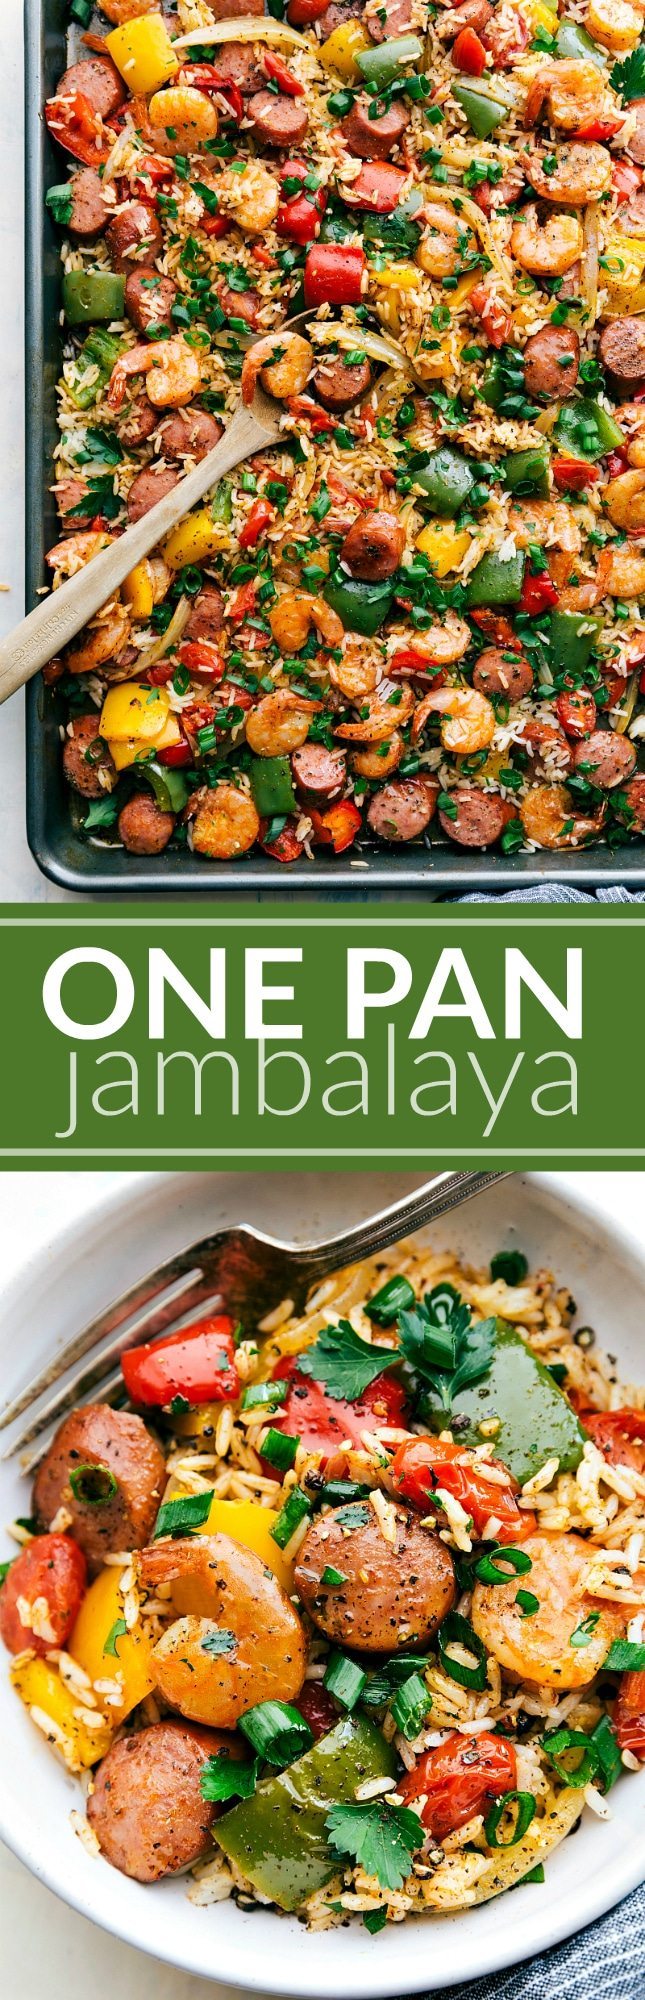 ONE PAN JAMBALAYA! Sausage, shrimp, seasoned veggies, AND rice all cooked together on ONE PAN! Easy 30-minute dinner via chelseasmessyapron.com